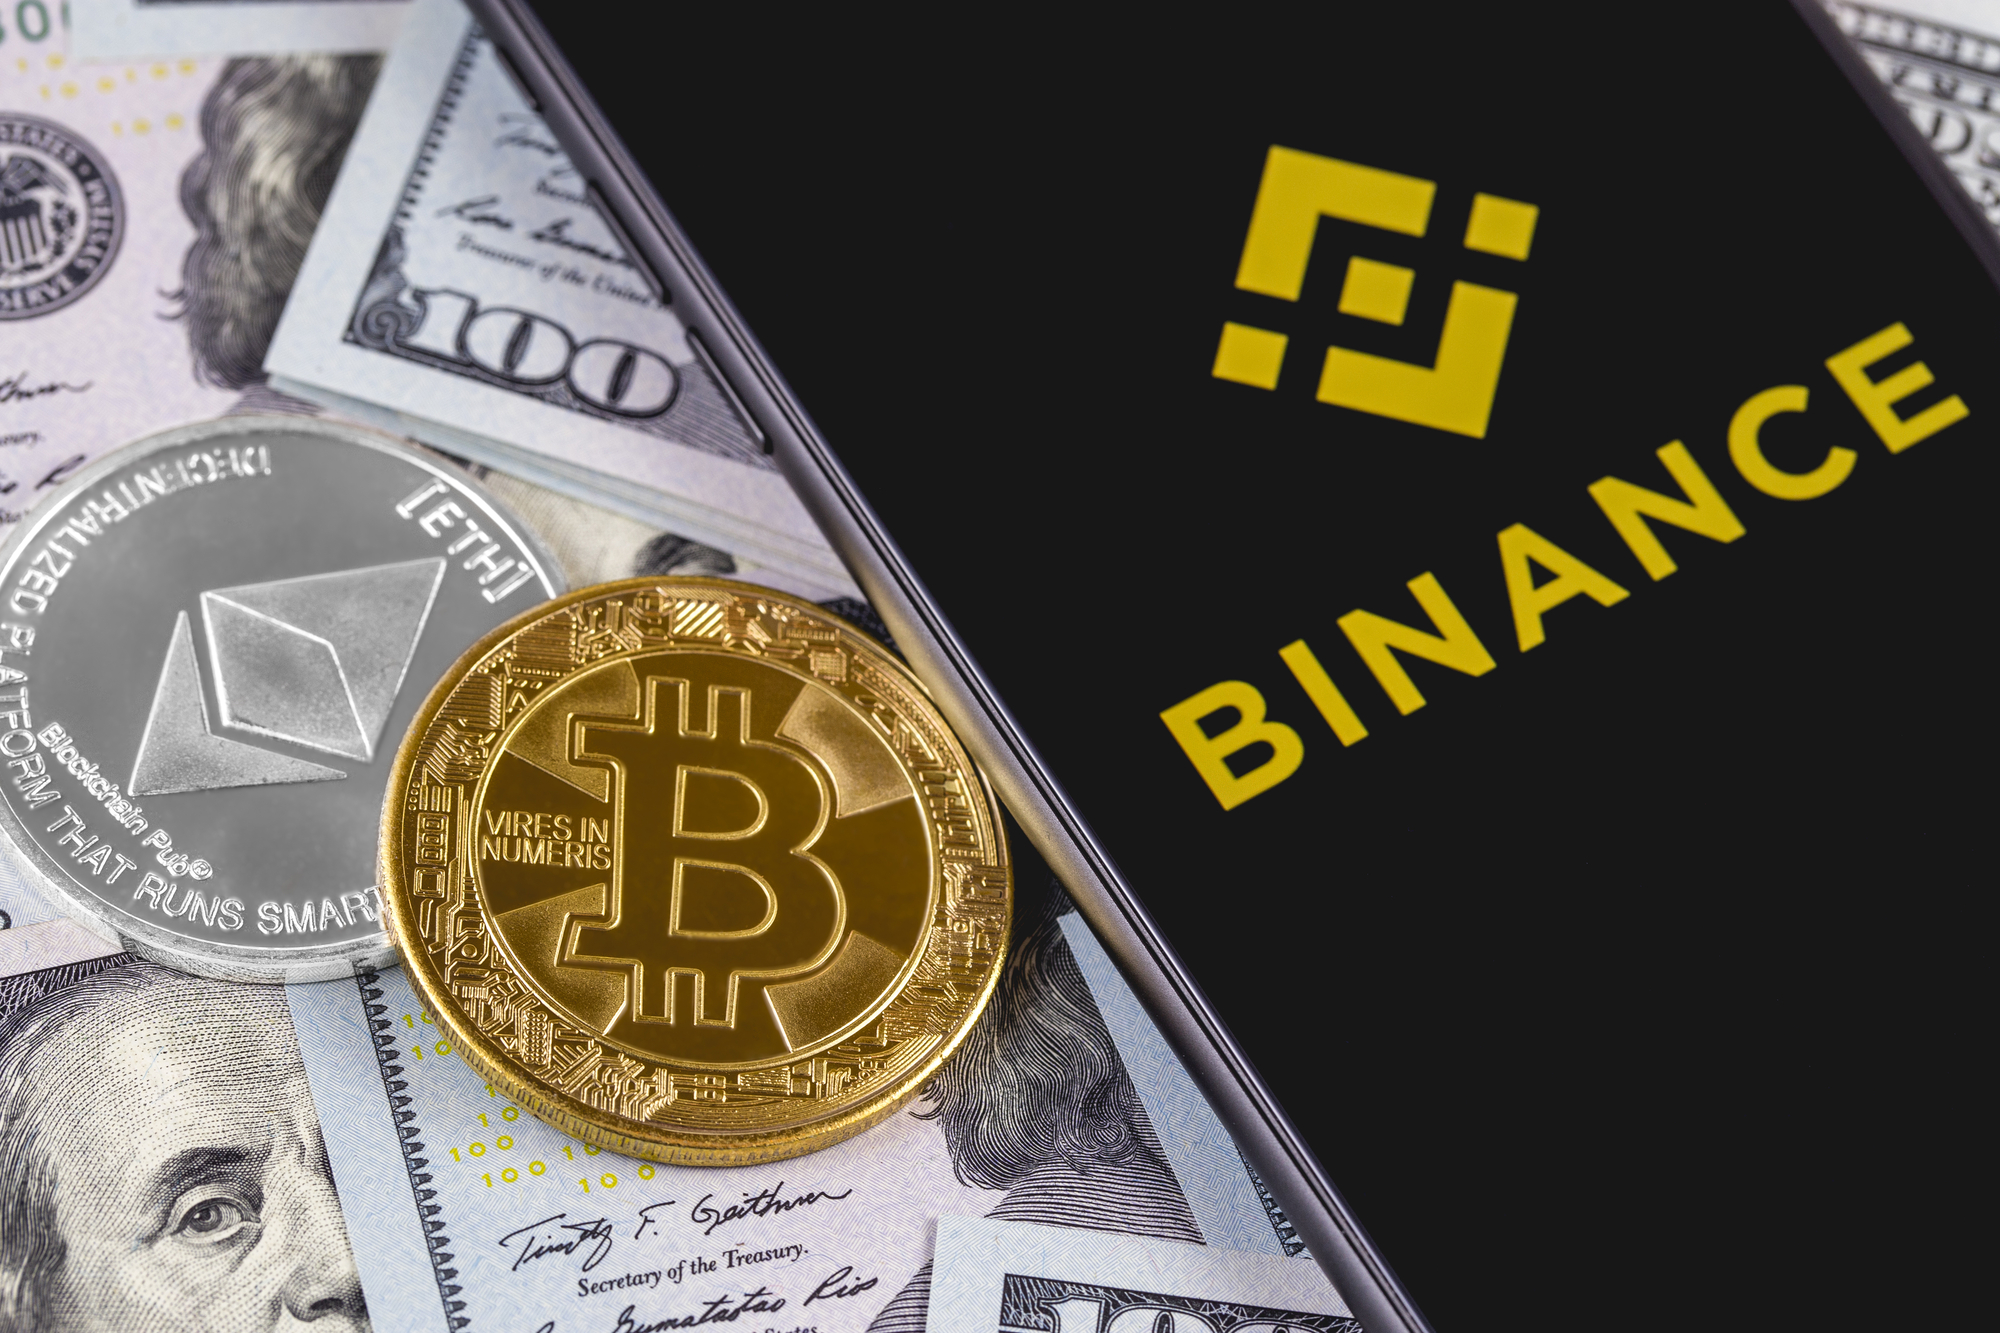 Apple iPhone and Binance logo and bitcoin, ethereum and dollars. Binance is a cryptocurrency exchange. Ekaterinburg, Russia - September 19, 2018